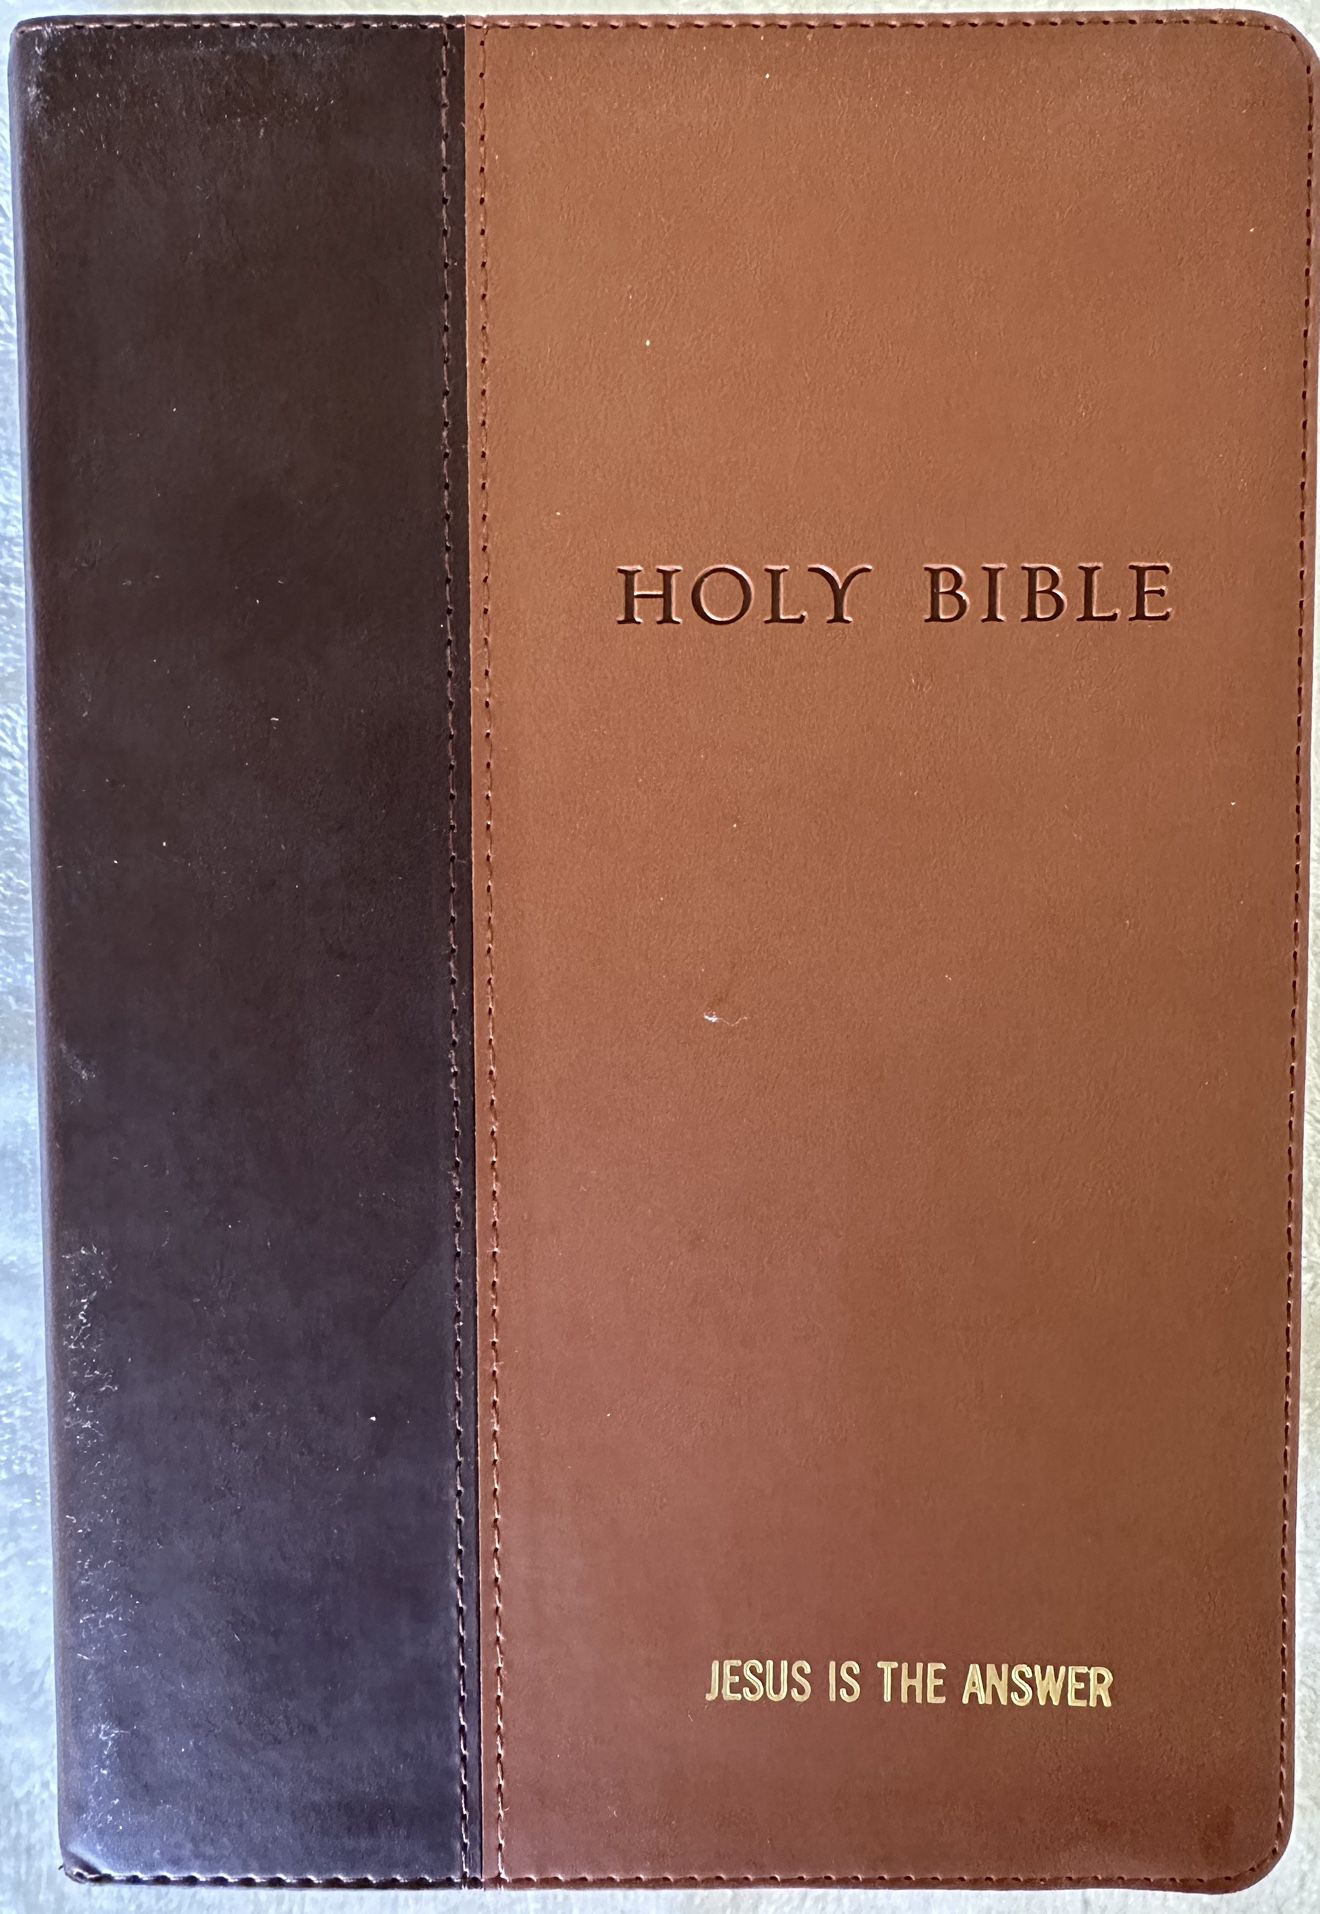 Holy Bible with Leather Cover